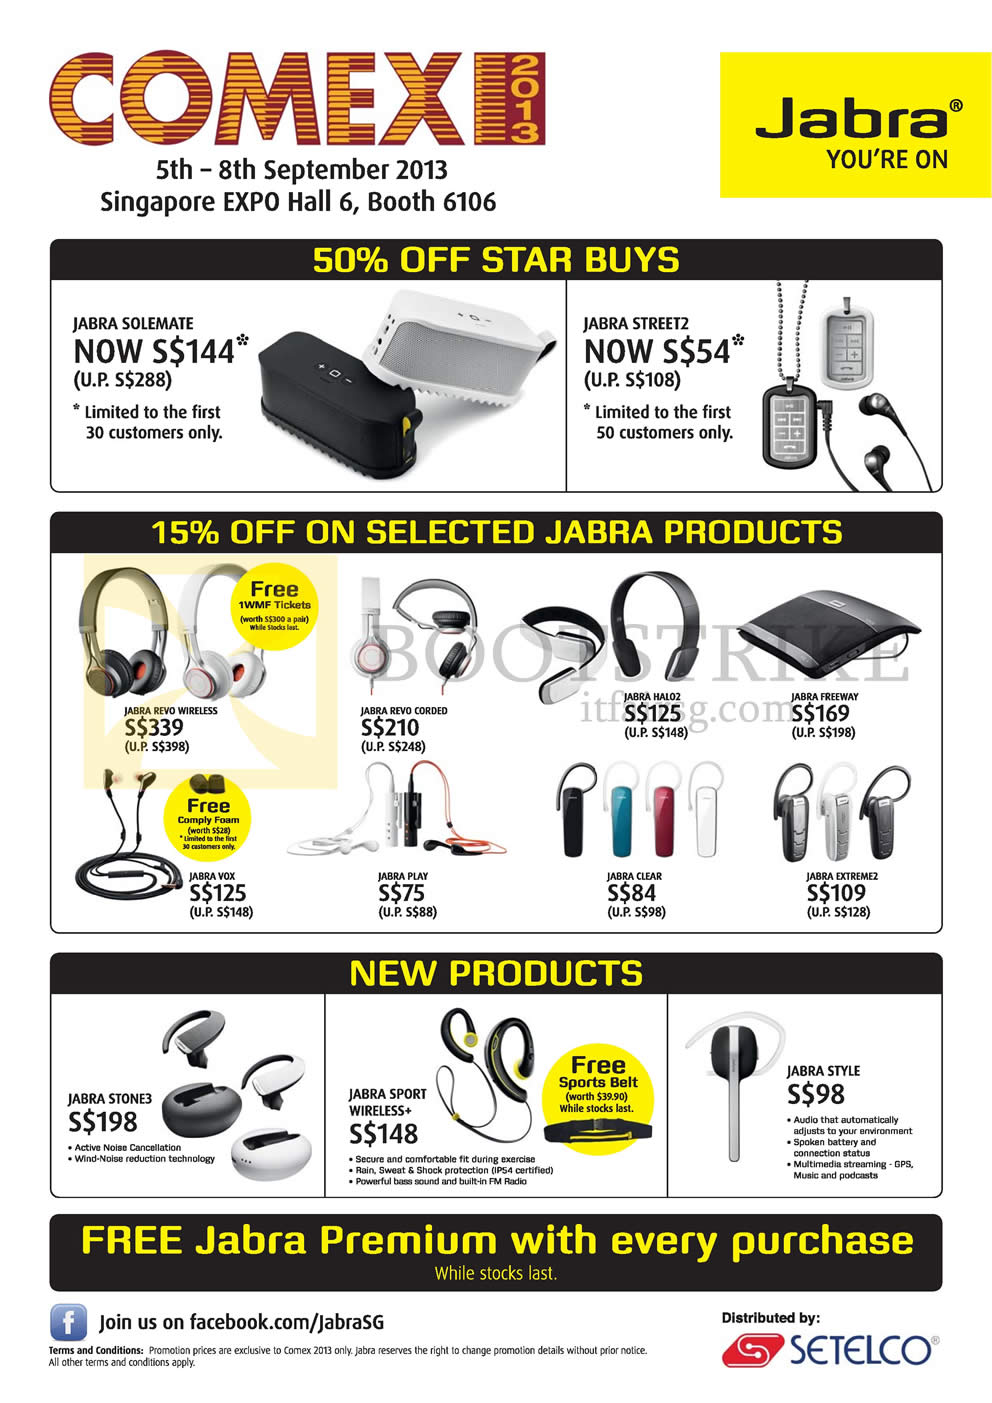 COMEX 2013 price list image brochure of Nubox Jabra Bluetooth Headsets Solemate, Street2, Revo, HAL02, Freeway, Vox, Play, Clear, Extreme2, Stone3, Sport, Style